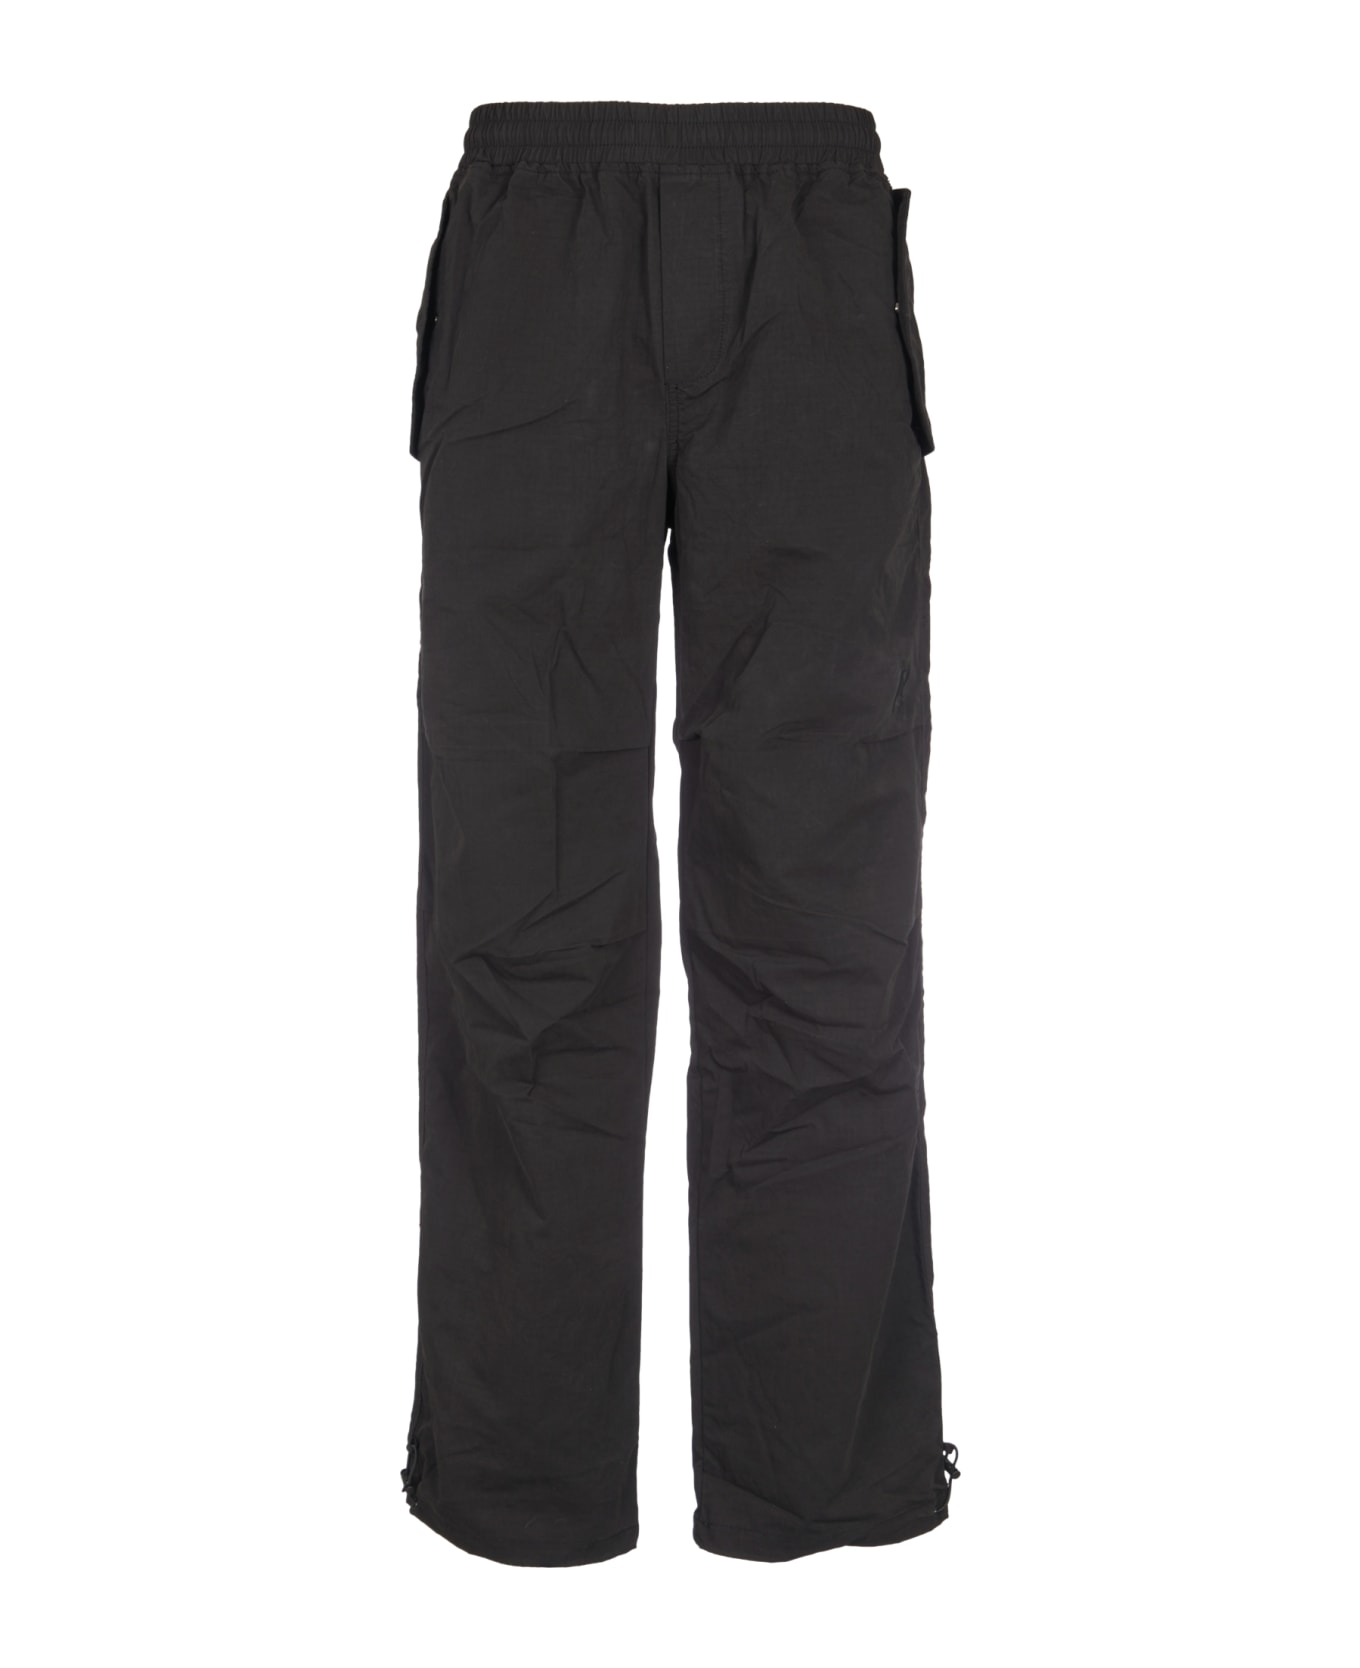 REPRESENT Buttoned Pocket Trousers - Black ボトムス